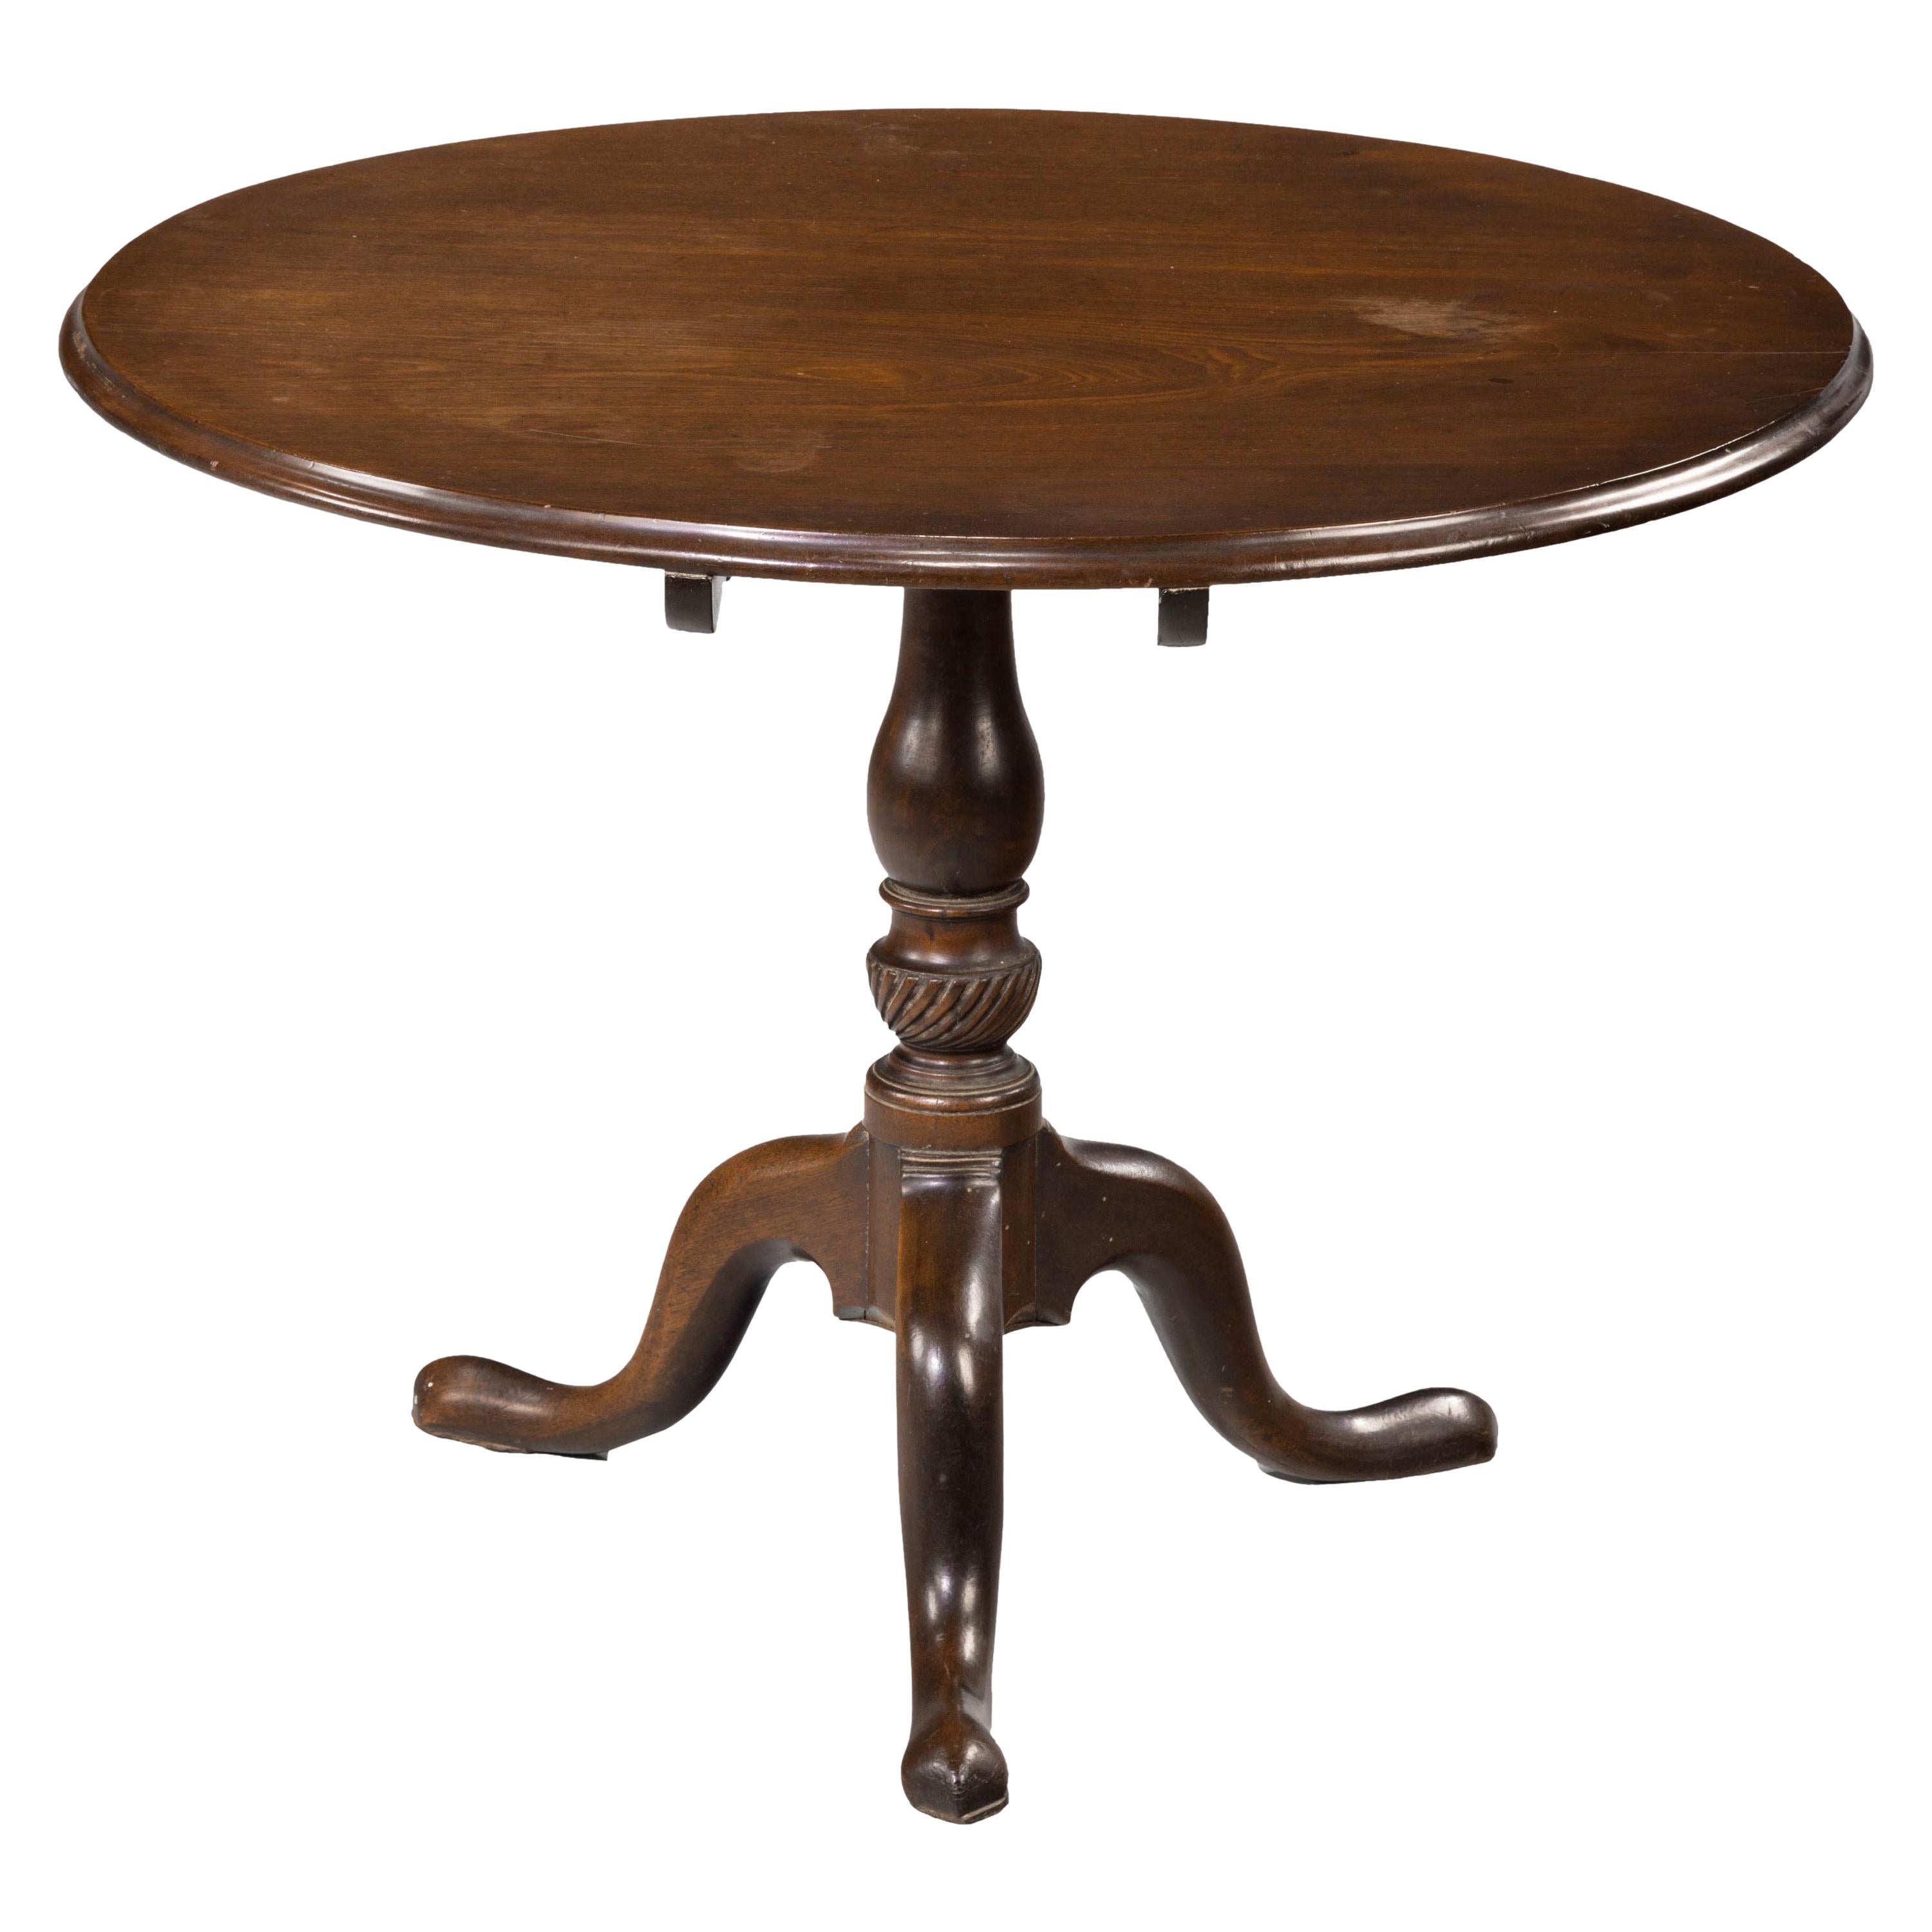 George III Mahogany Tilt Table of Substantial Size